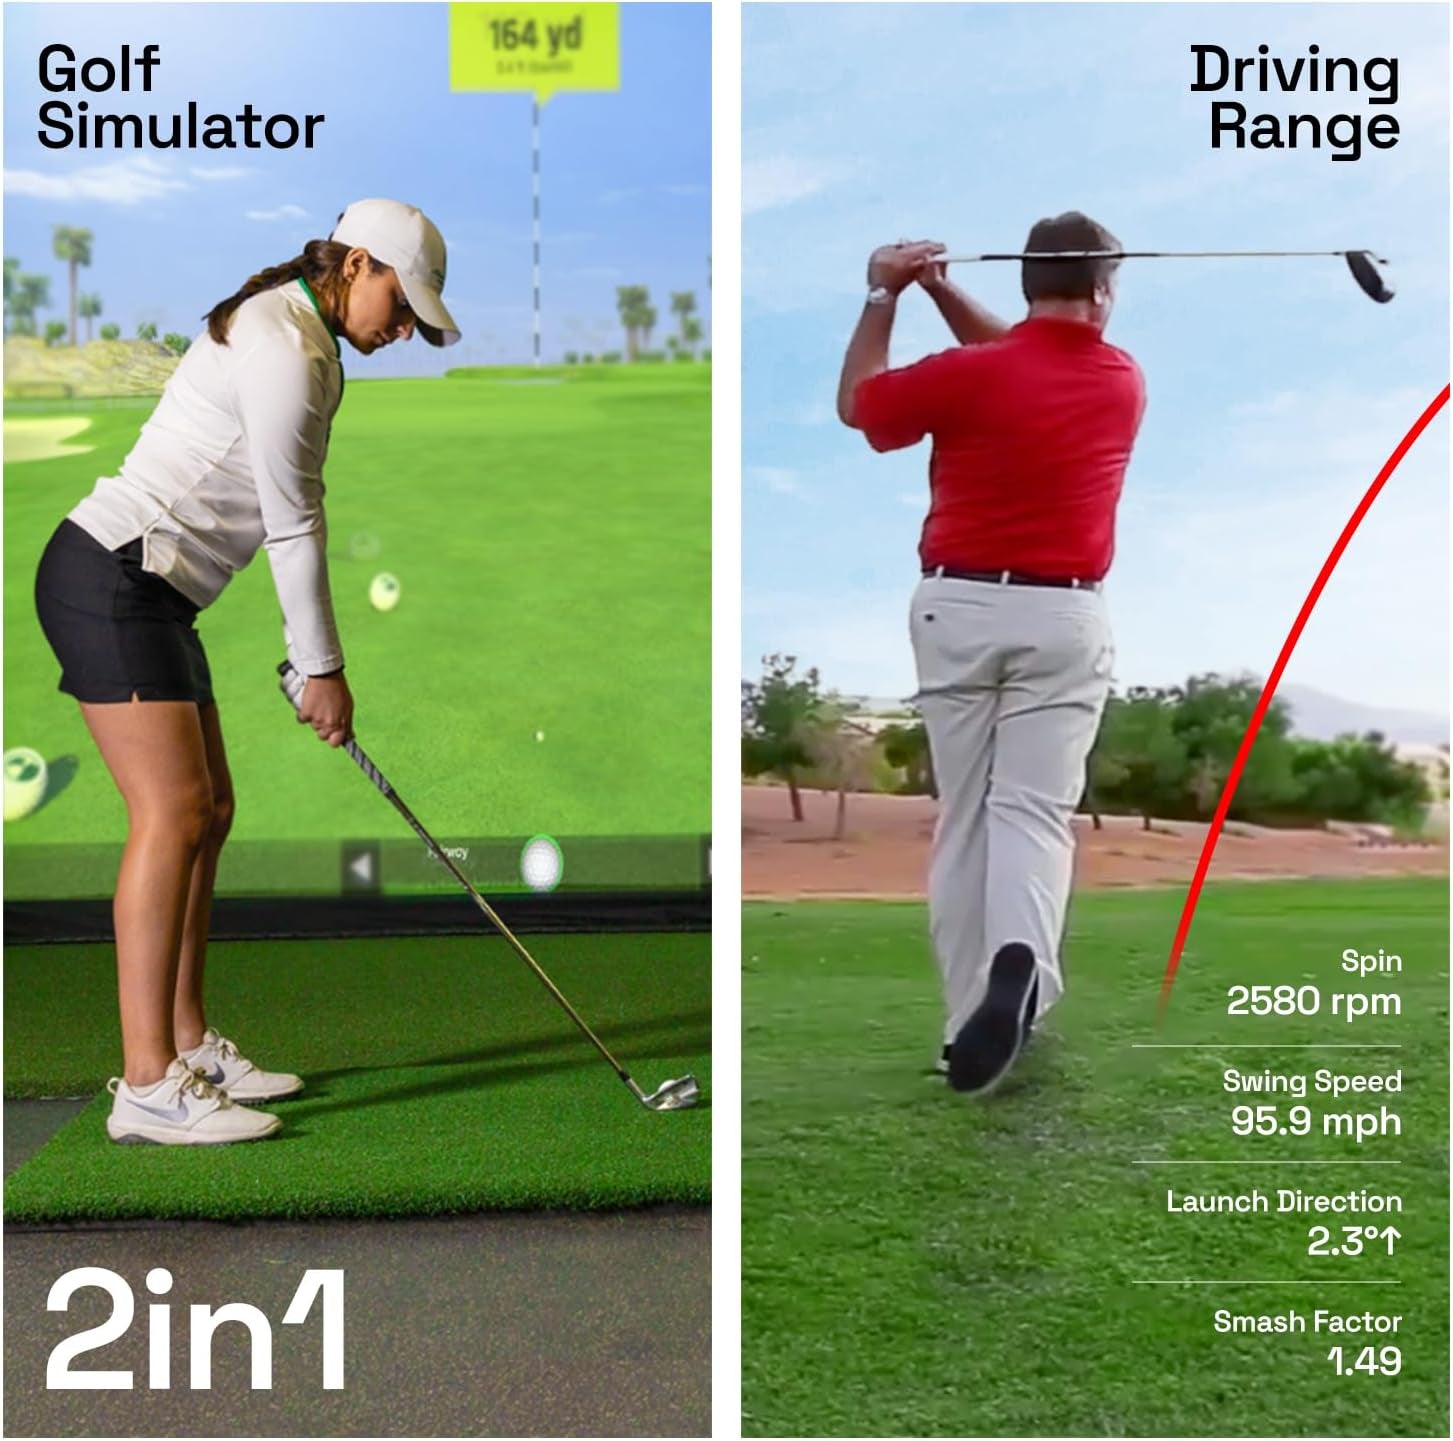 Orbit Golf Simulator and Launch Monitor Golf Simulators for Home with Orion Software - Golf Launch Monitor - 20 Courses and 3 Practice Ranges Included